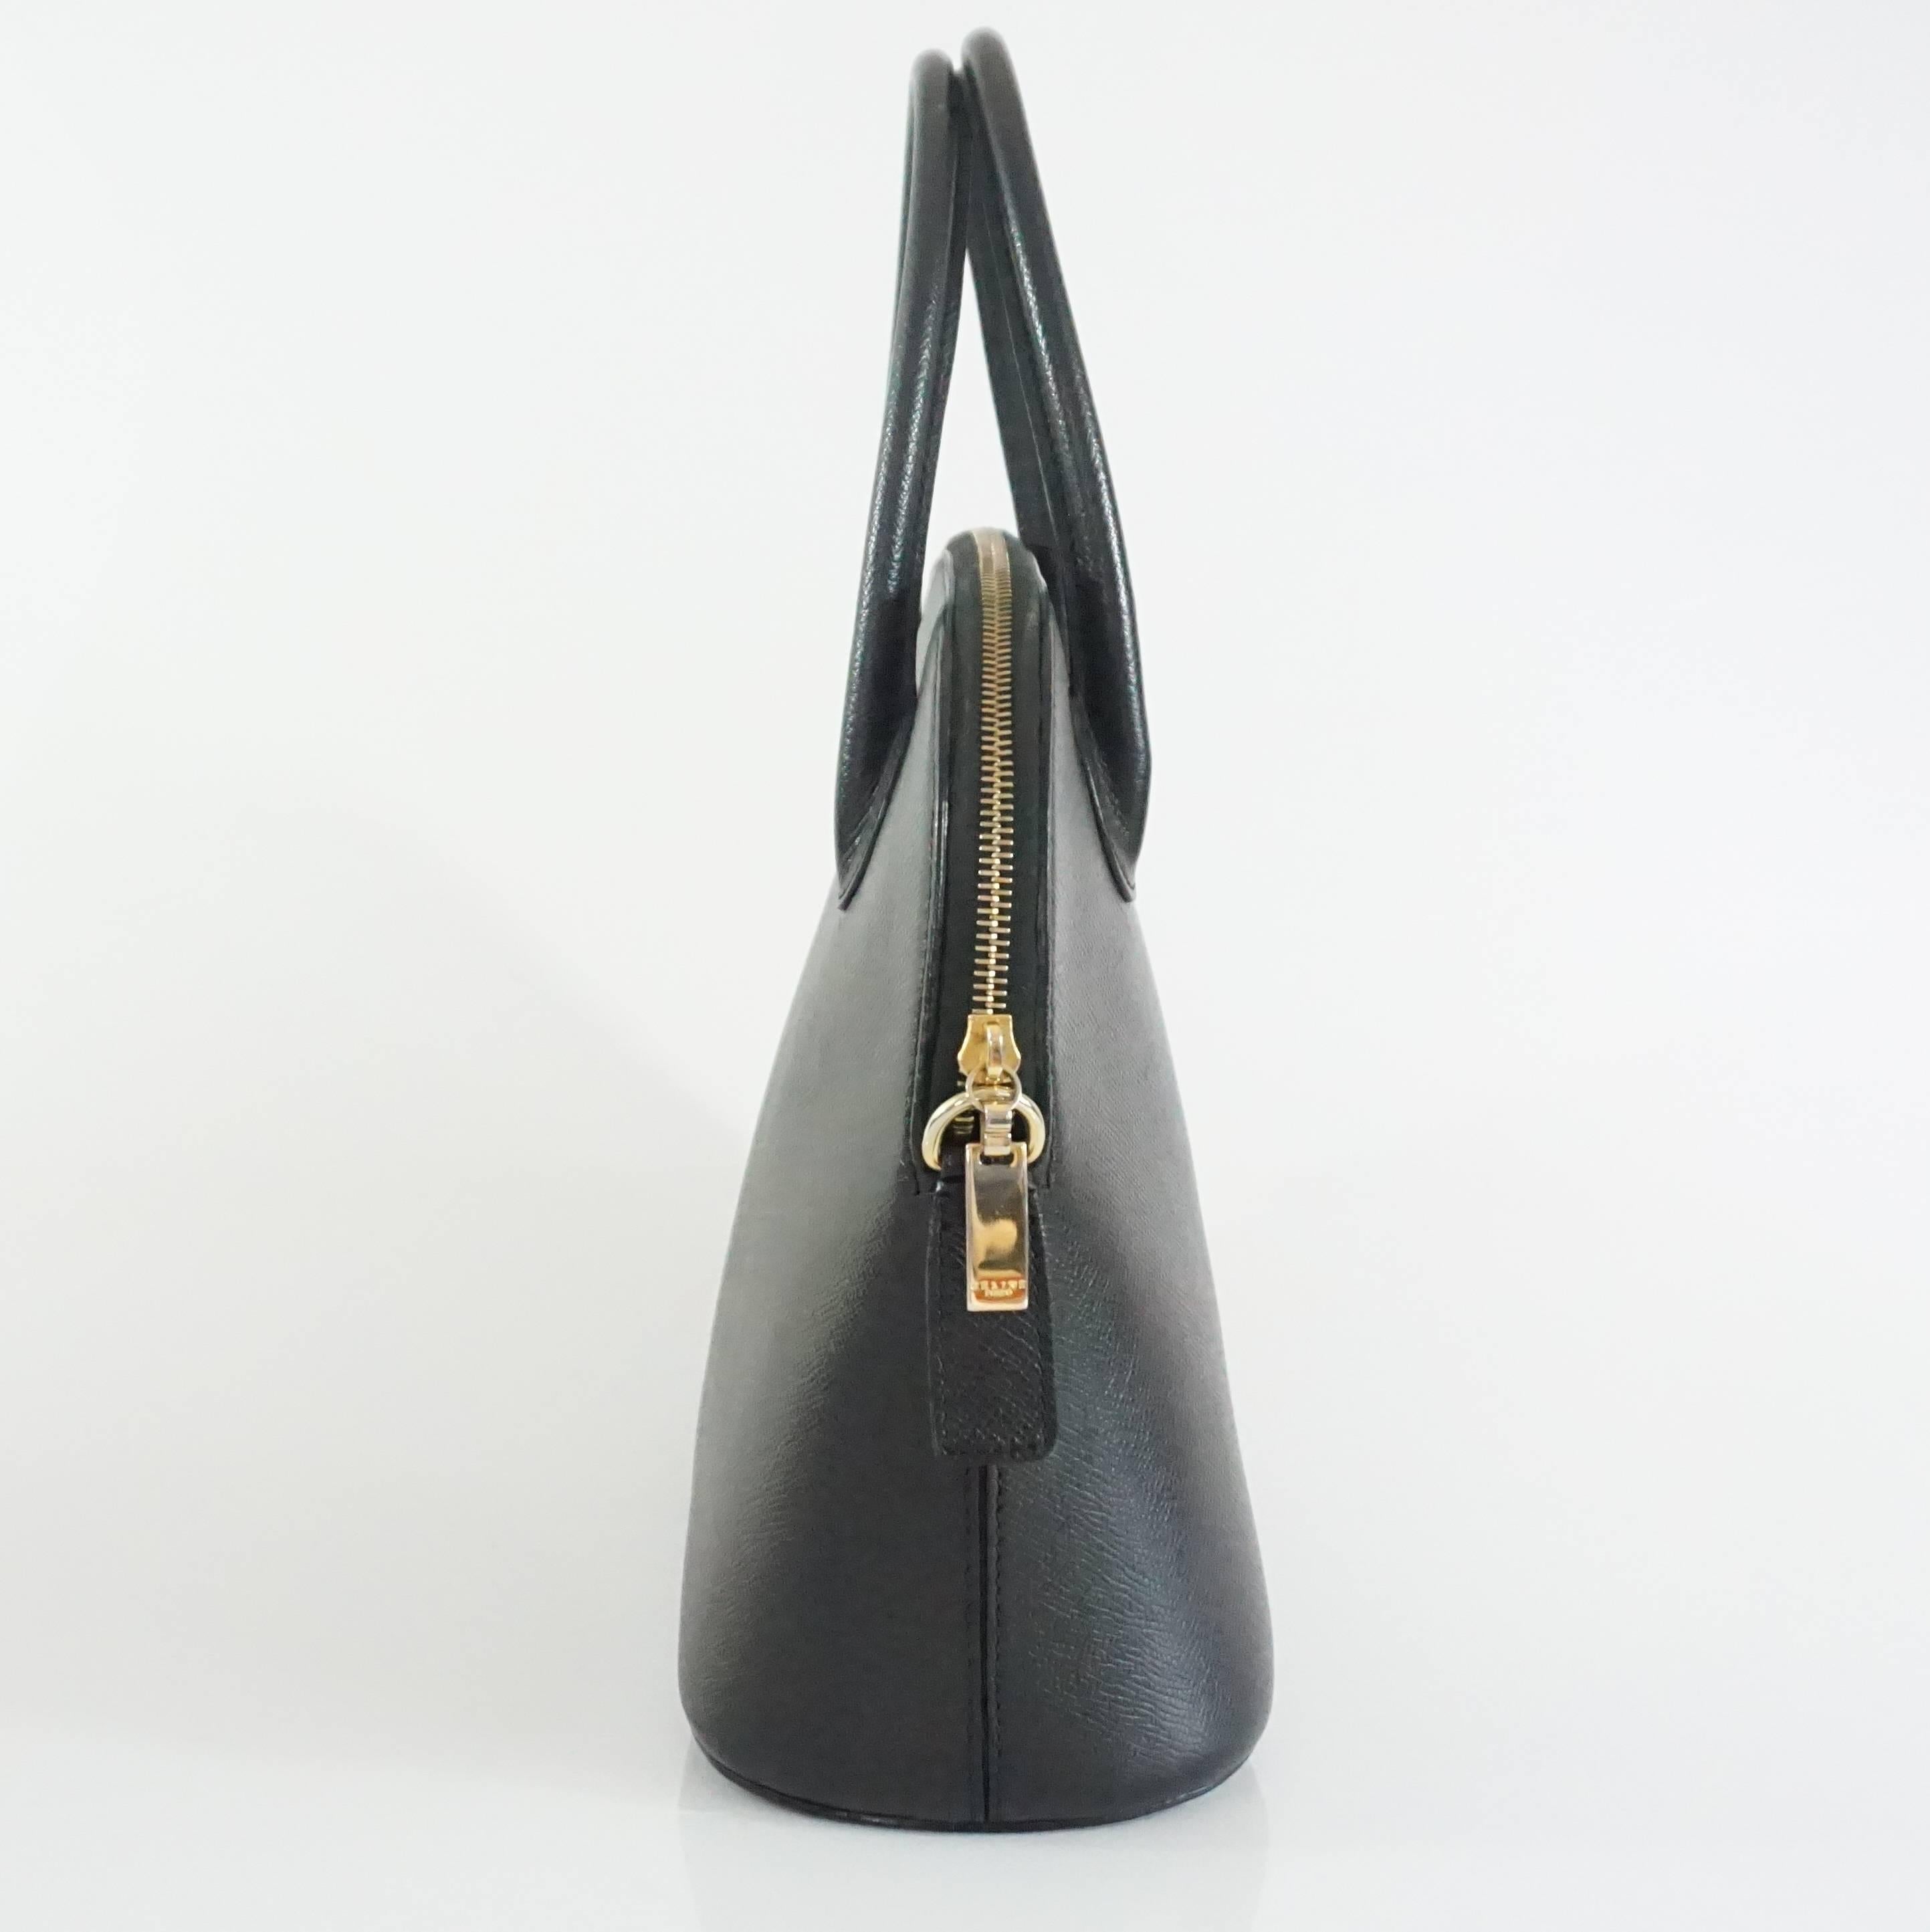 This beautiful Celine bag features black saffiano leather, top handles, and a removable shoulder strap. There is a zippered interior pocket and 4 feet. This bag is in very good condition with some markings on the leather.

Measurements
Height: